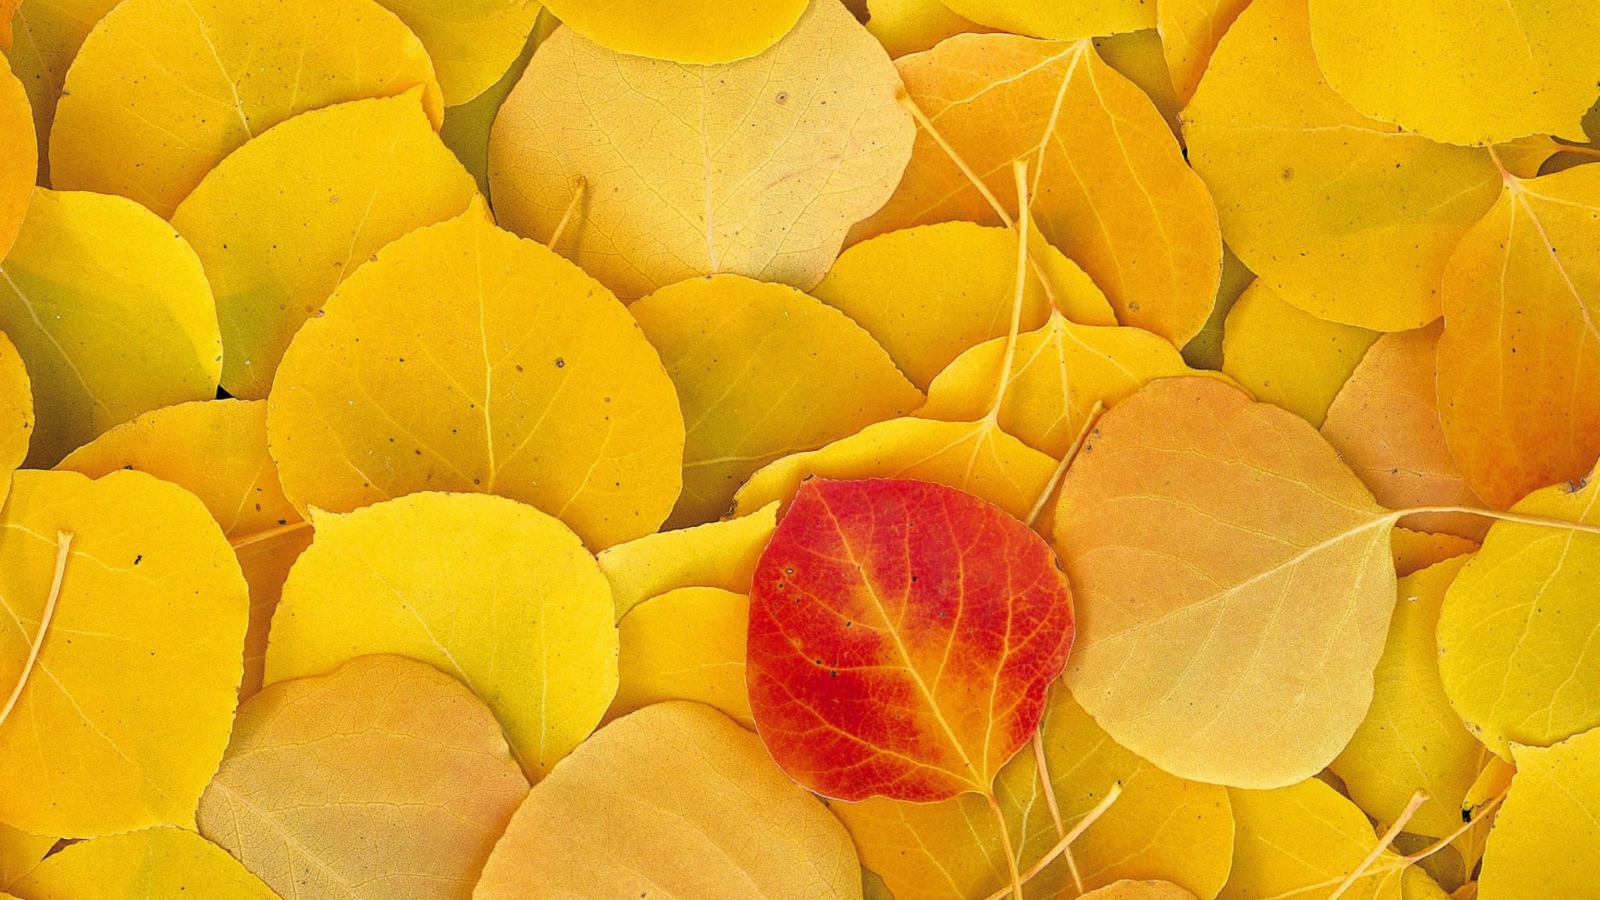 Red Leaf On Yellow Leaves wallpaper 1600x900